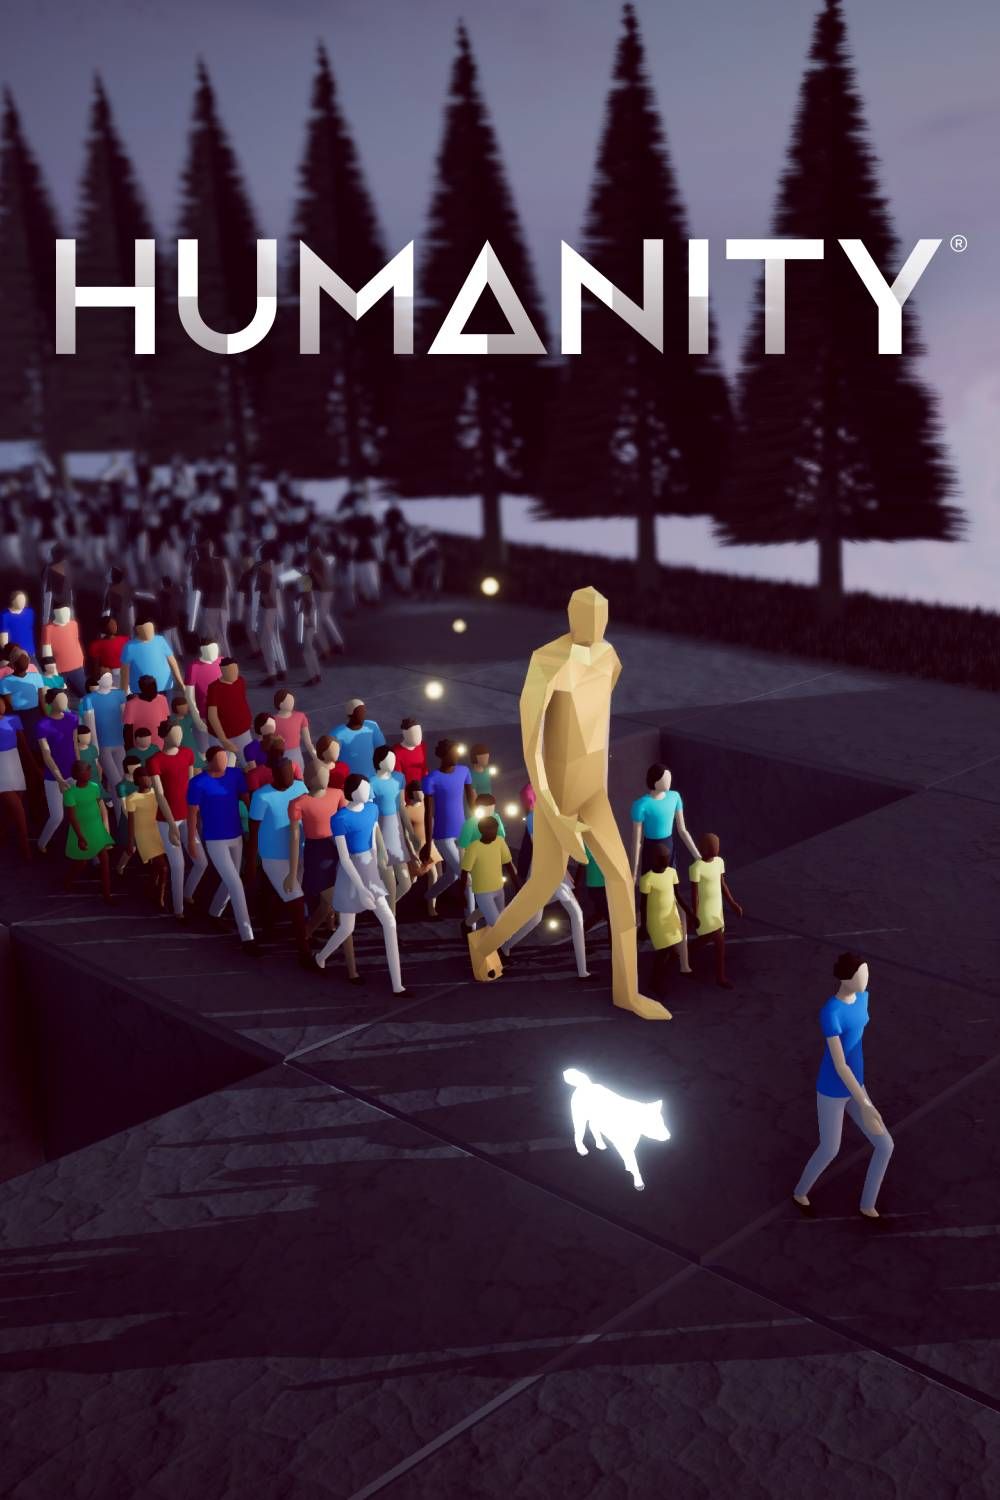 Humanity Cover